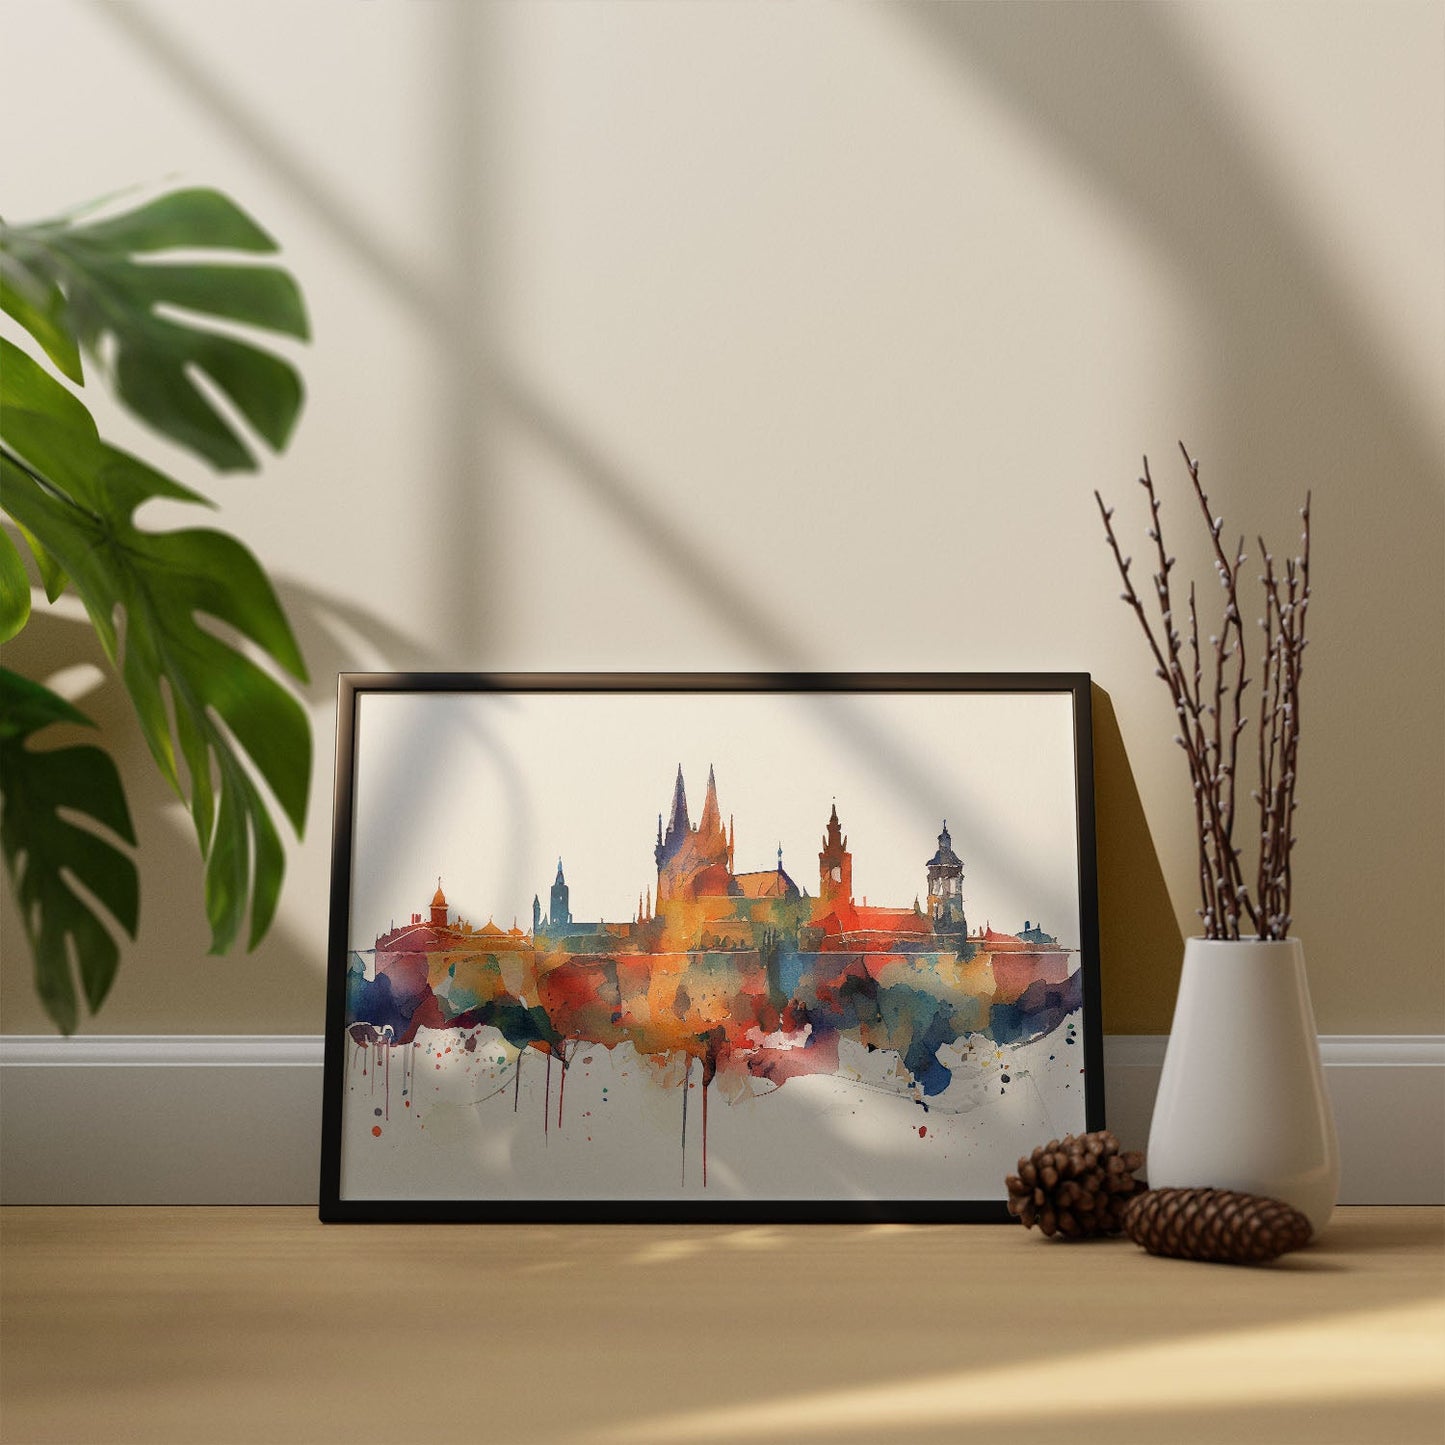 Nacnic watercolor of a skyline of the city of Prague_4. Aesthetic Wall Art Prints for Bedroom or Living Room Design.-Artwork-Nacnic-A4-Sin Marco-Nacnic Estudio SL